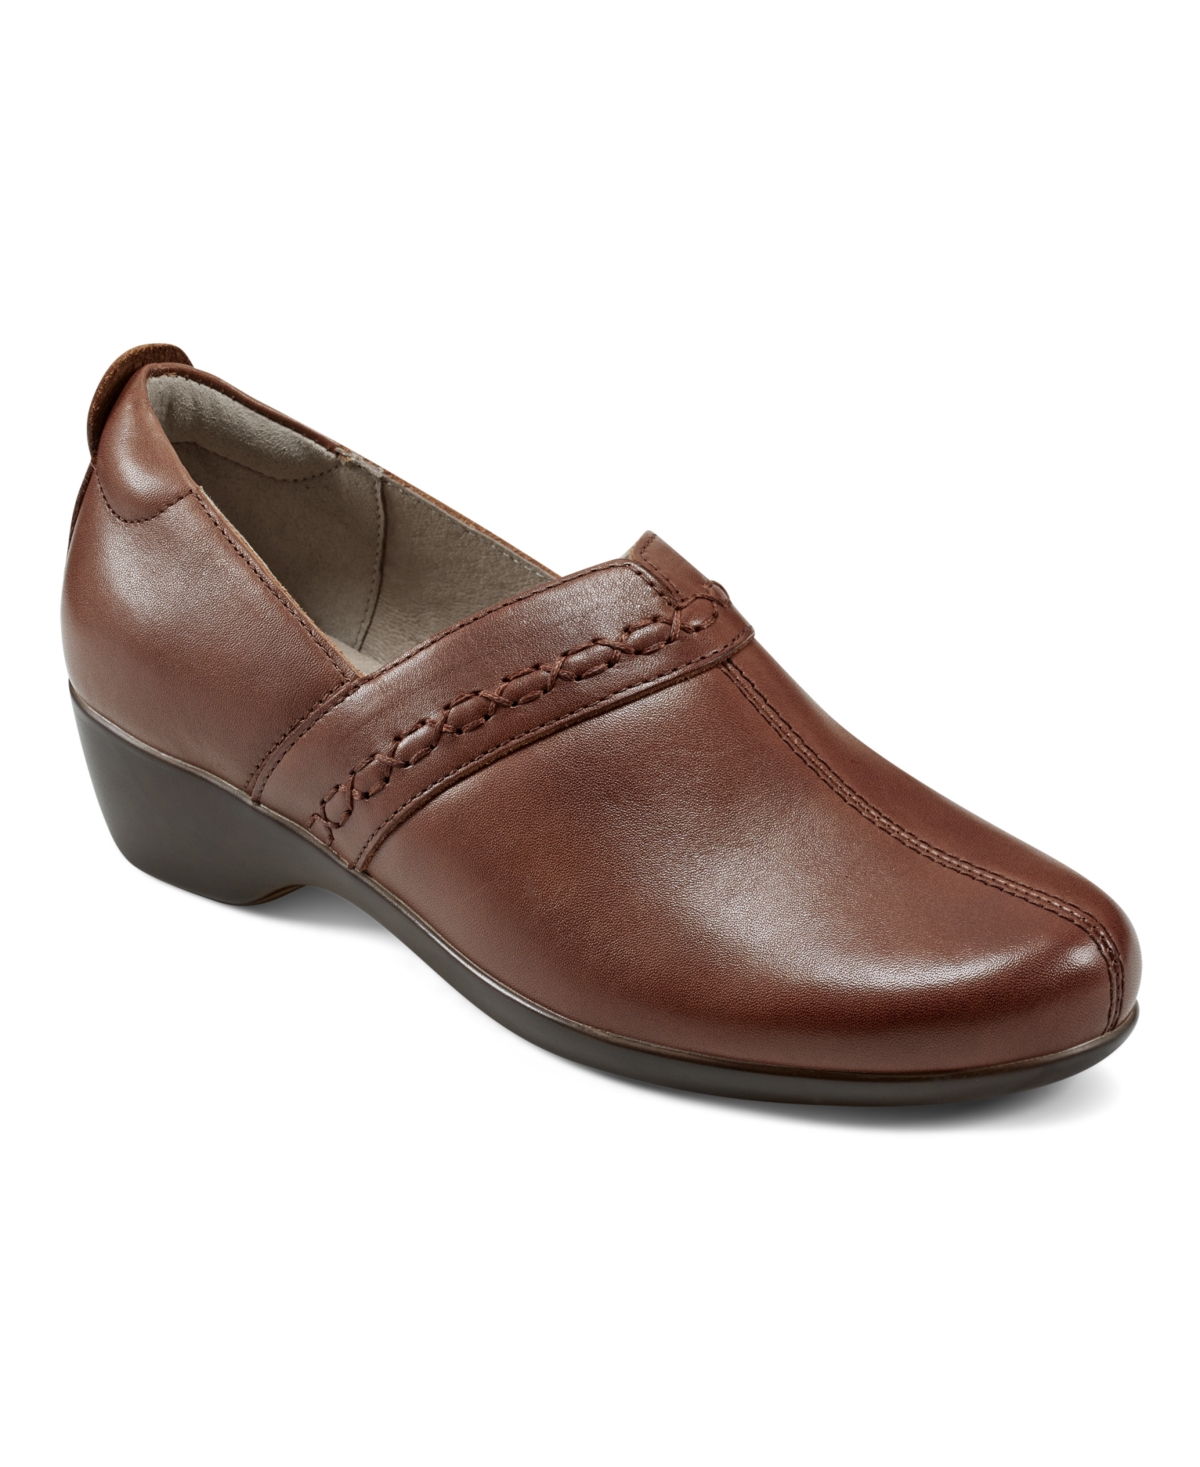 Women's Dolores Closed Toe Casual Slip-Ons - Medium Brown Leather